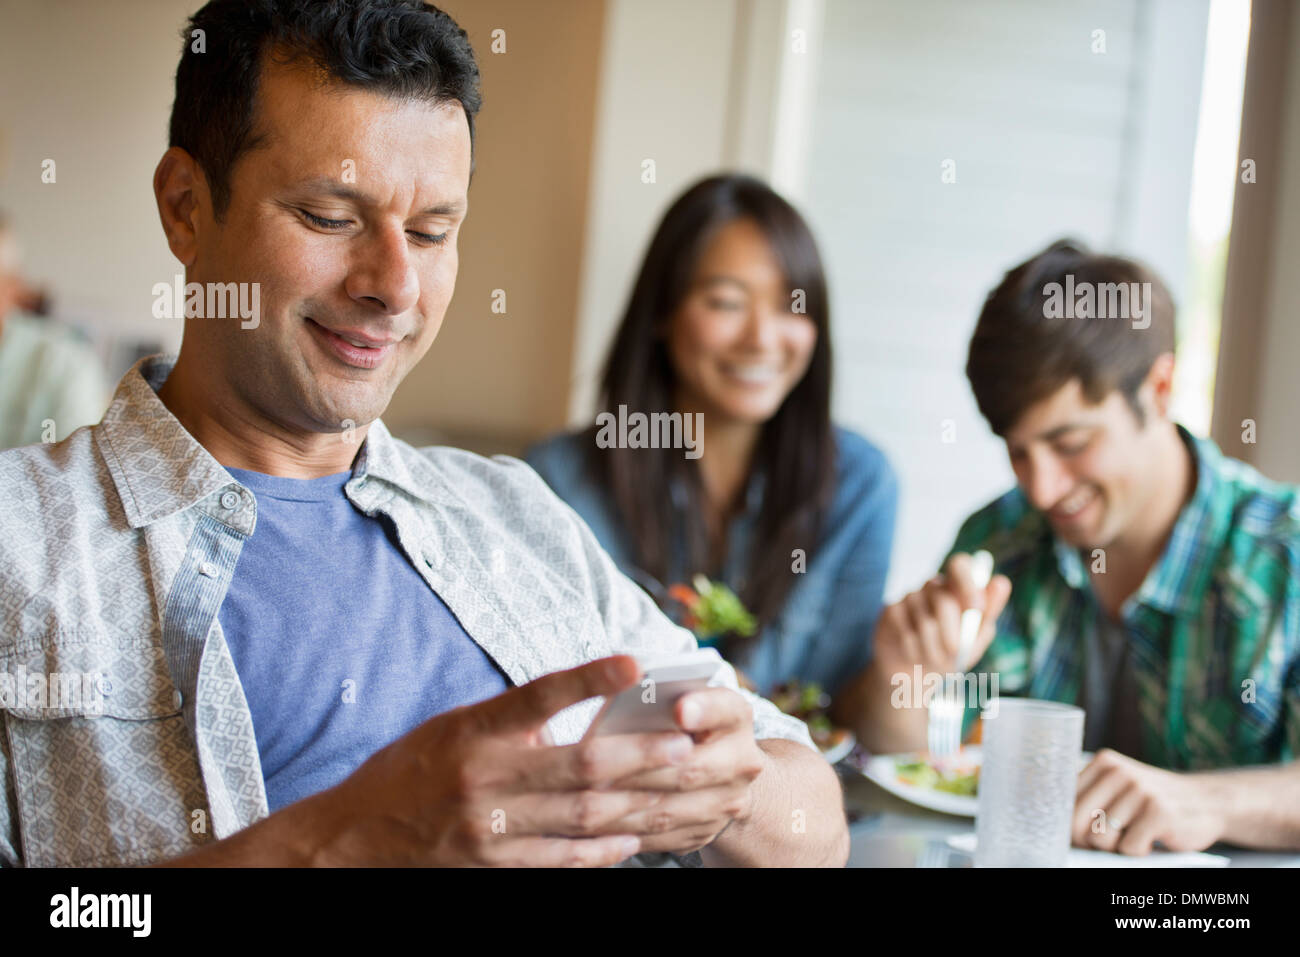 Three people seated at a cafe table. Stock Photo